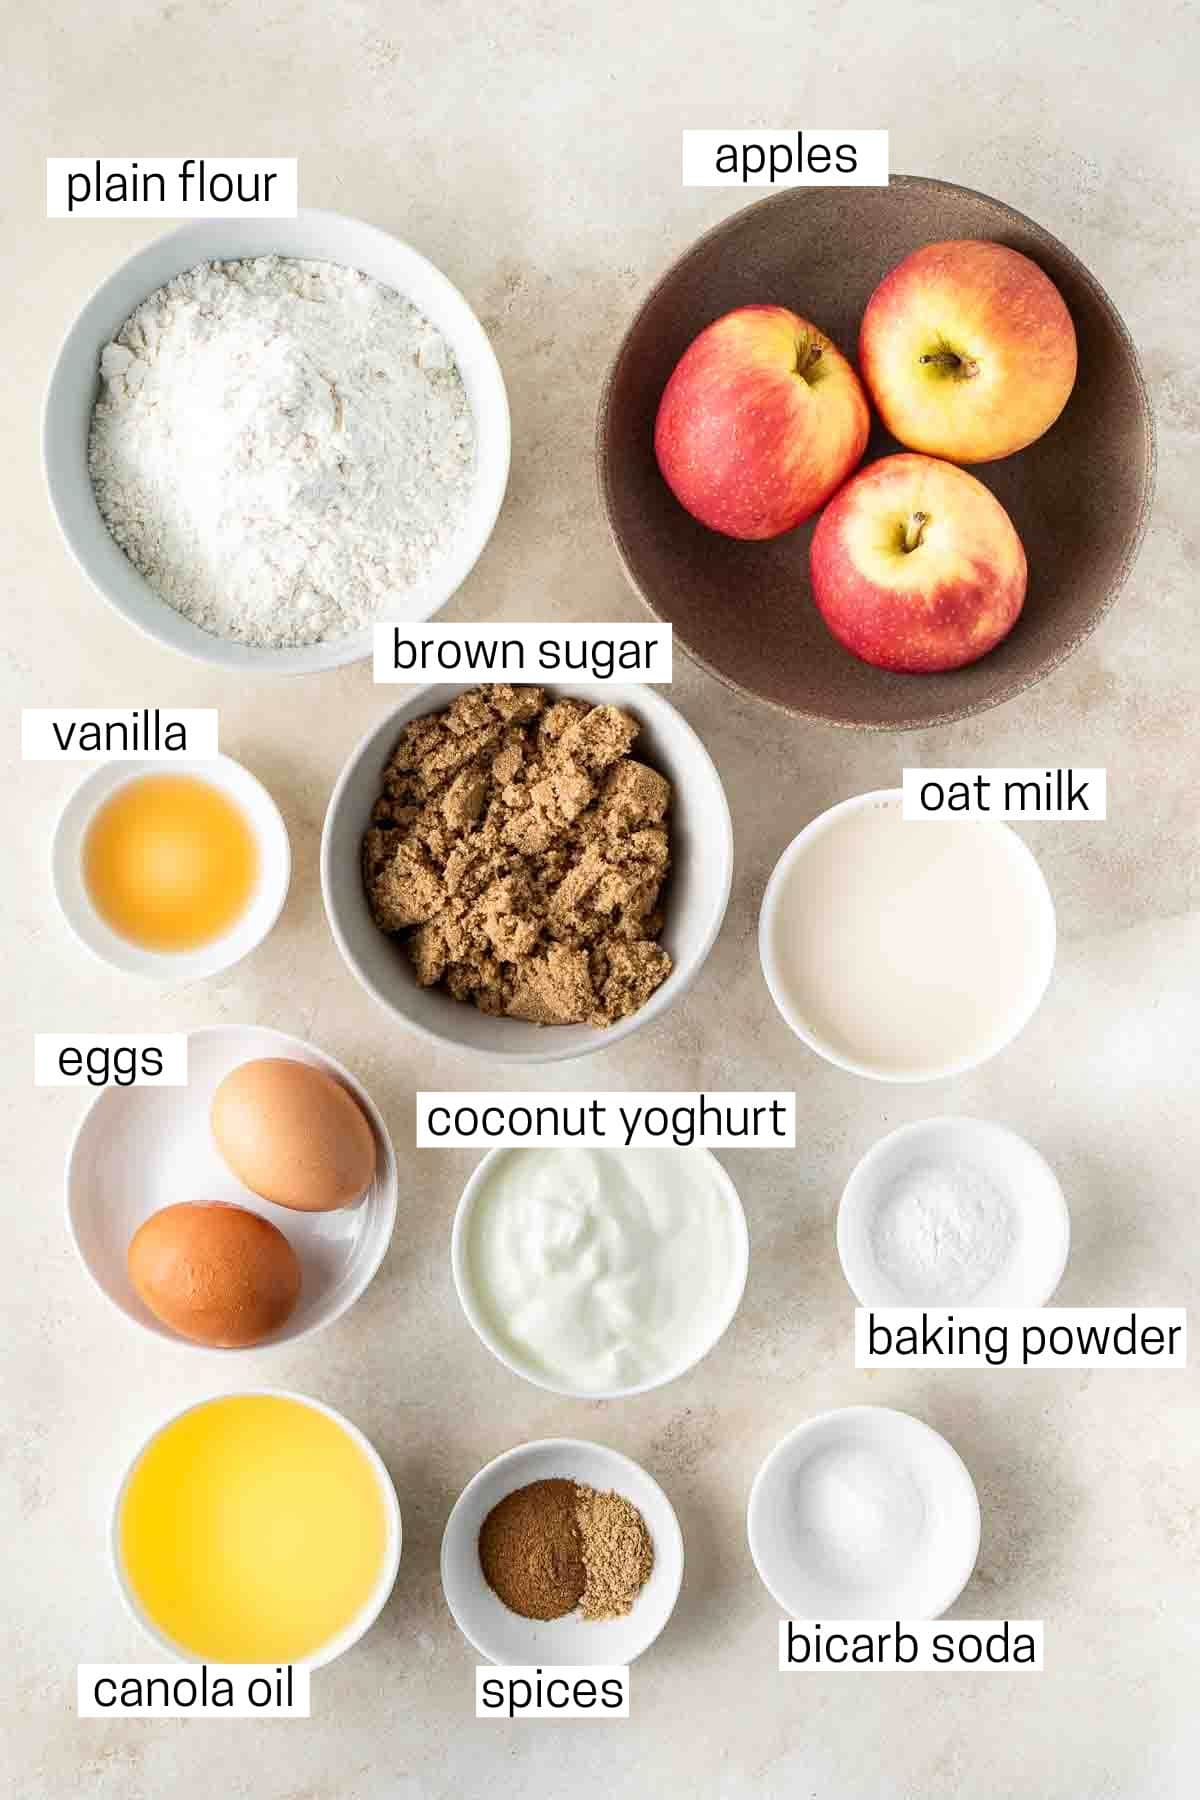 All ingredients needed to make apple cinnamon bread laid out in bowls.